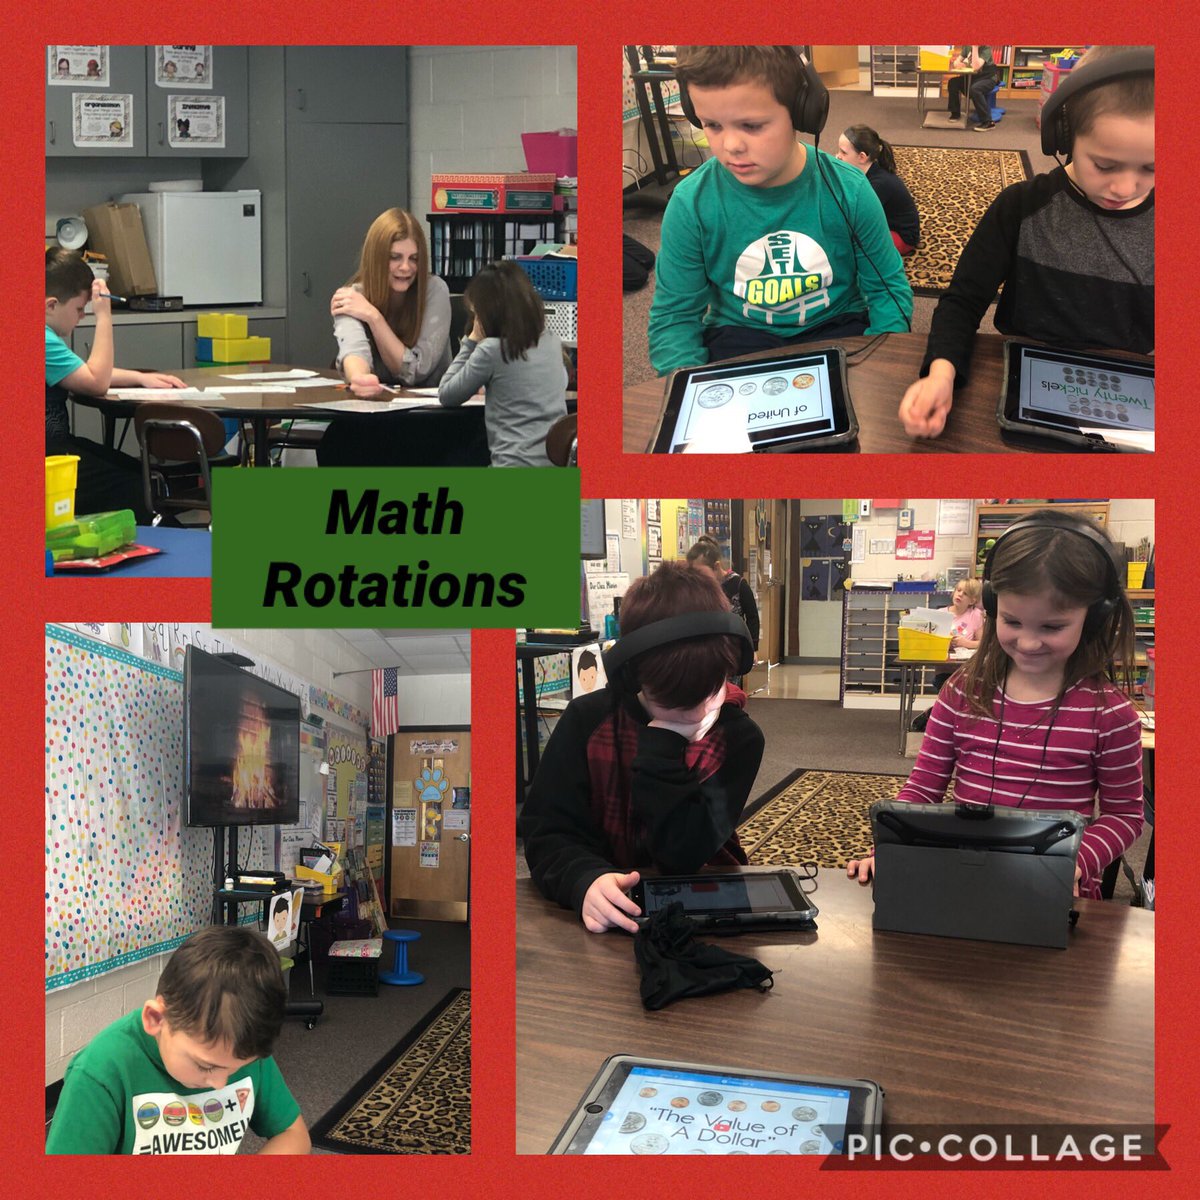 @CougarsCE Ss are loving Math rotations with @KaylaDunlap80 and @nearpod with a cozy fire in the background #bpsne #ipadacademy